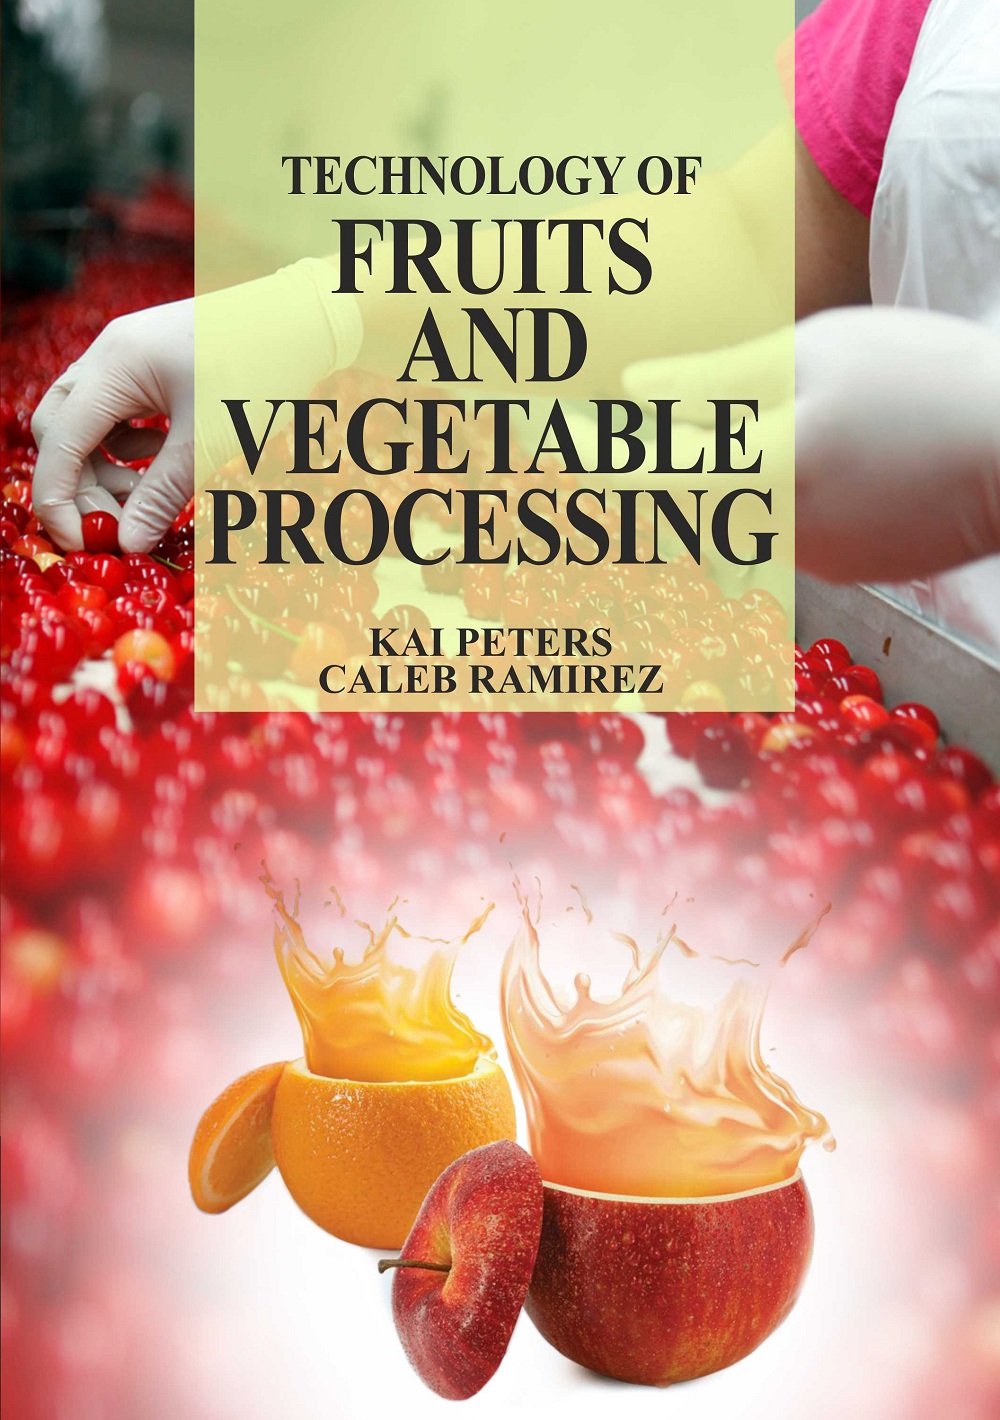 Technology of fruits and vegetable processing